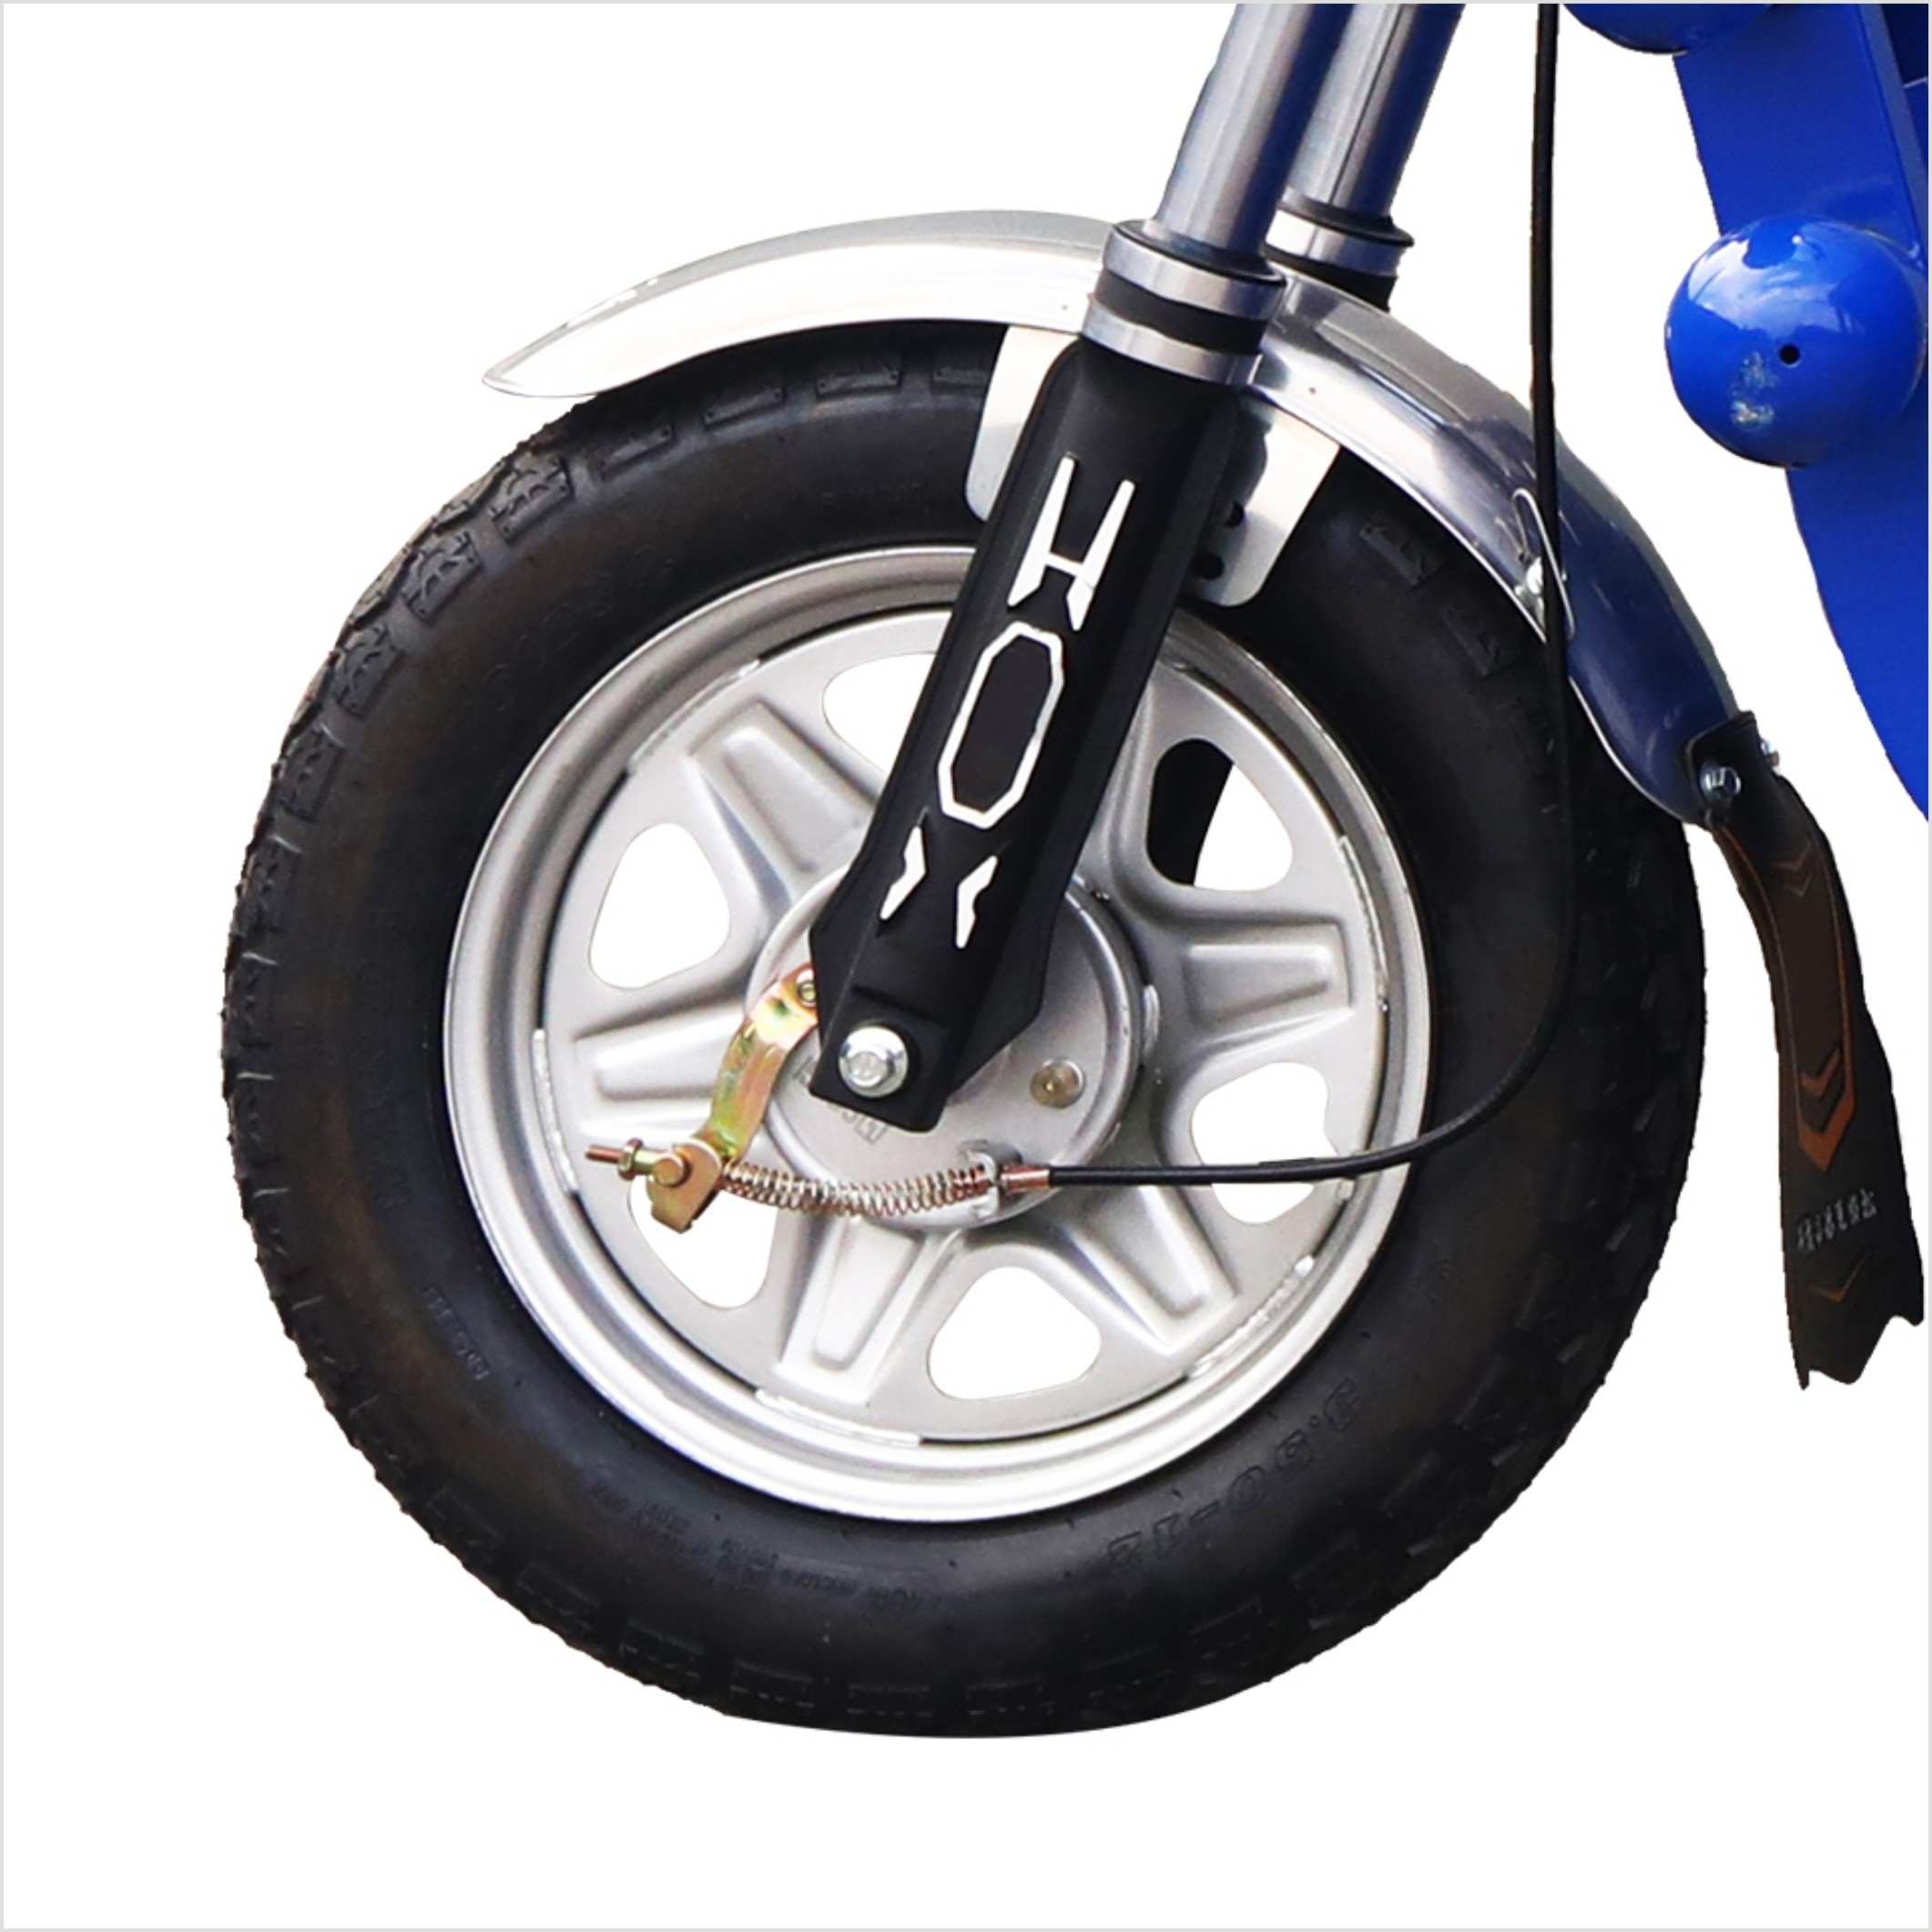 Supply Practical E-Tricycle, Practical E-Tricycle Factory Quotes, Practical E-Tricycle Producers